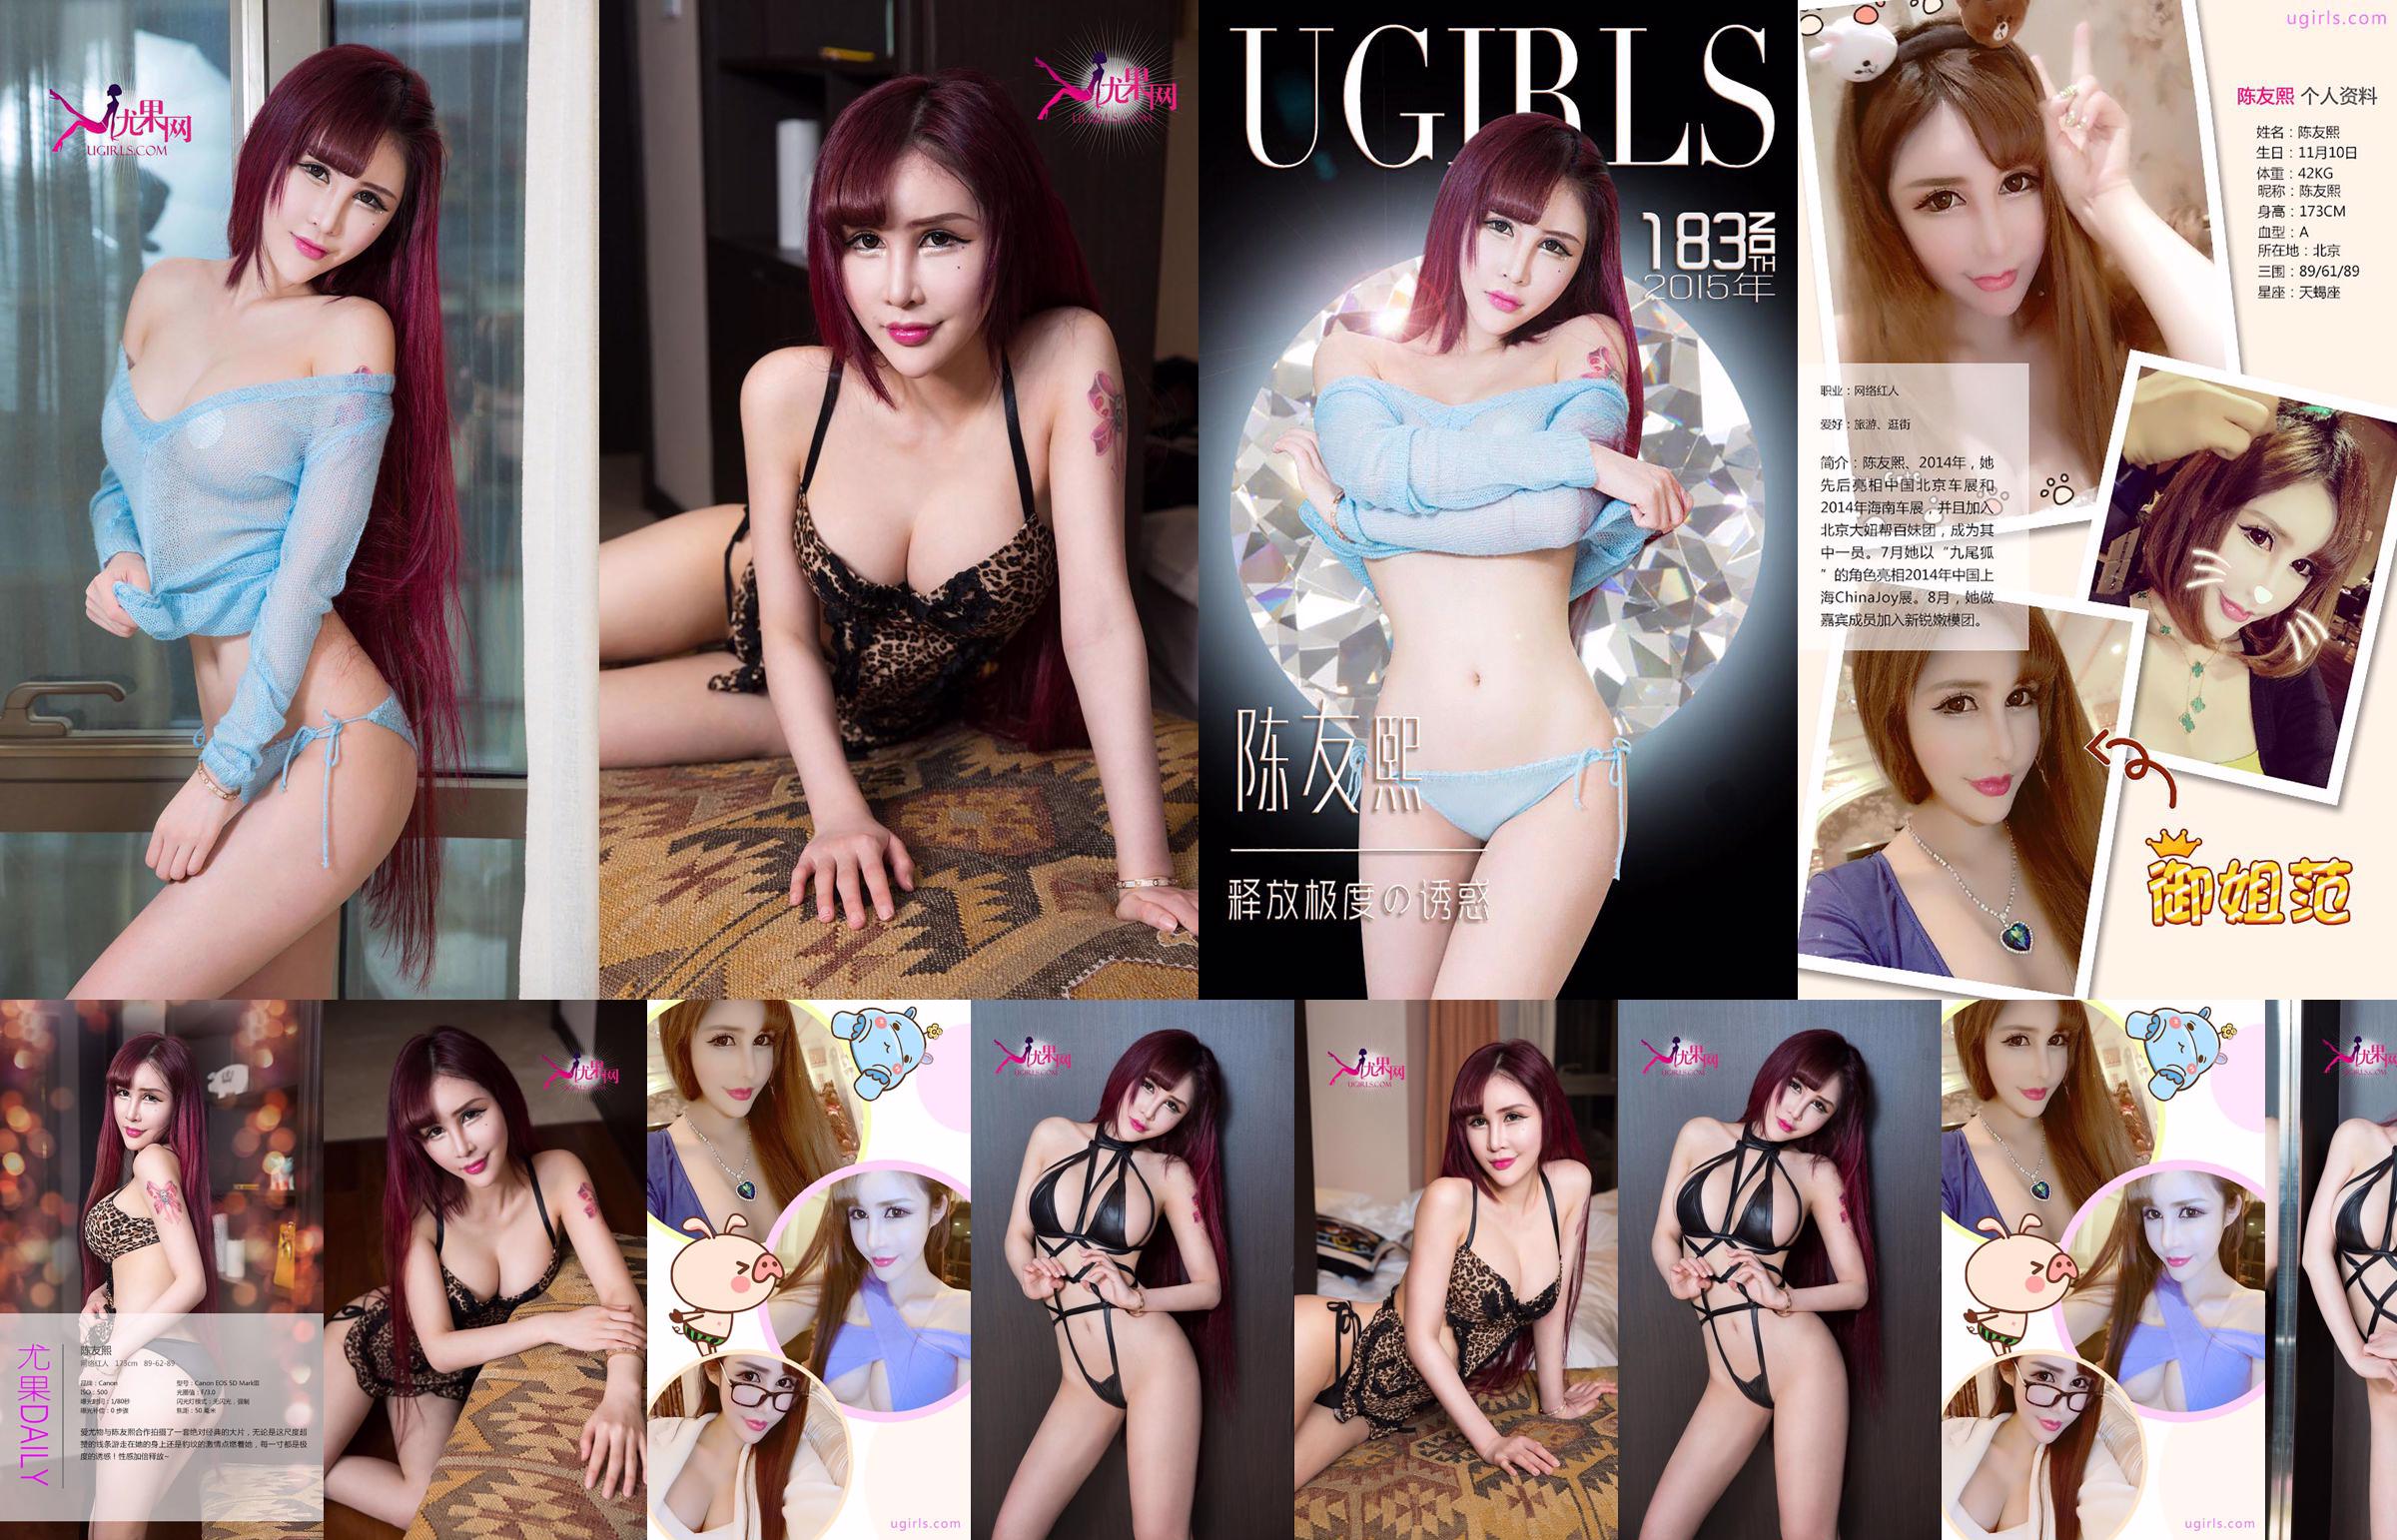 Chen Youxi "Release the Temptation of Jealousy" [爱优物Ugirls] No.183 No.f422fb Page 19